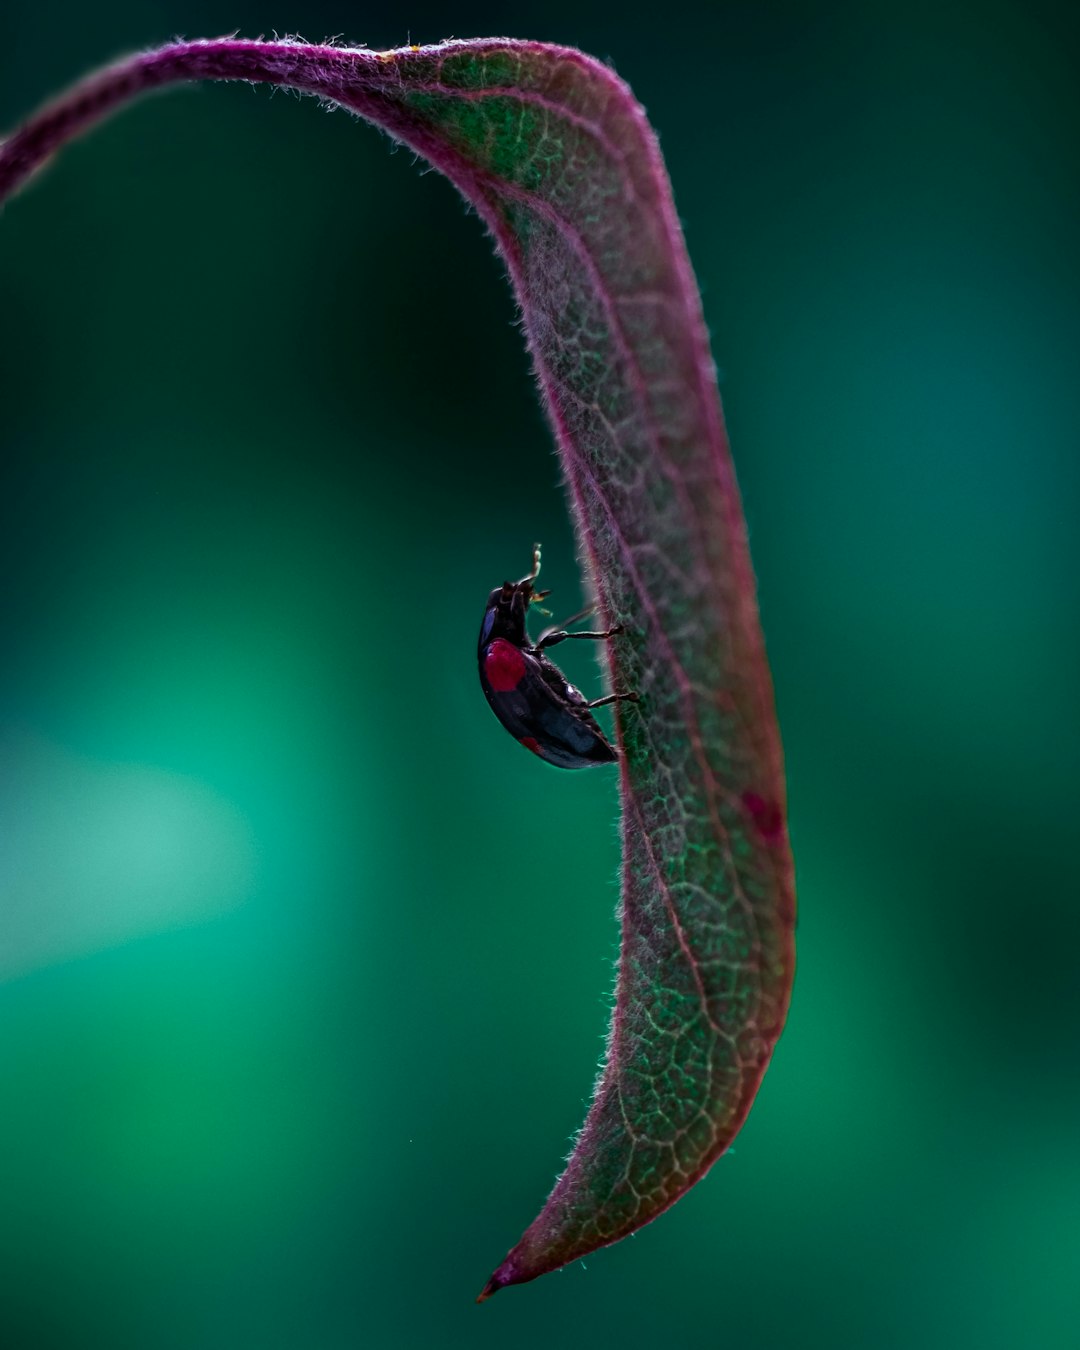 red and black beetle on green leaf in close up photography during daytime